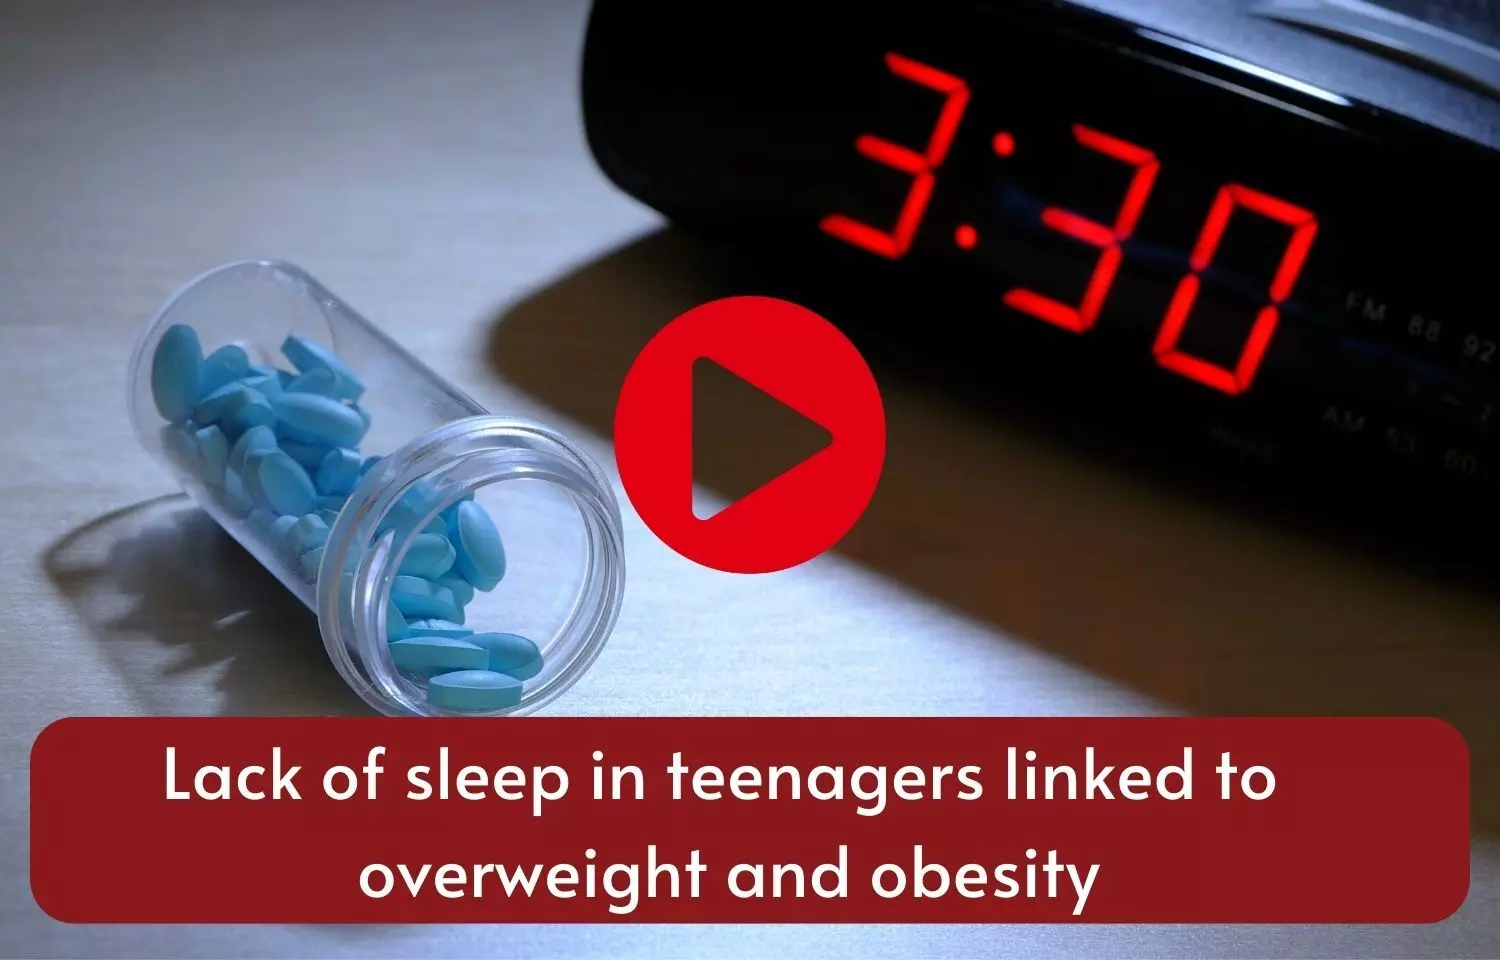 Lack of sleep in teenagers linked to overweight and obesity